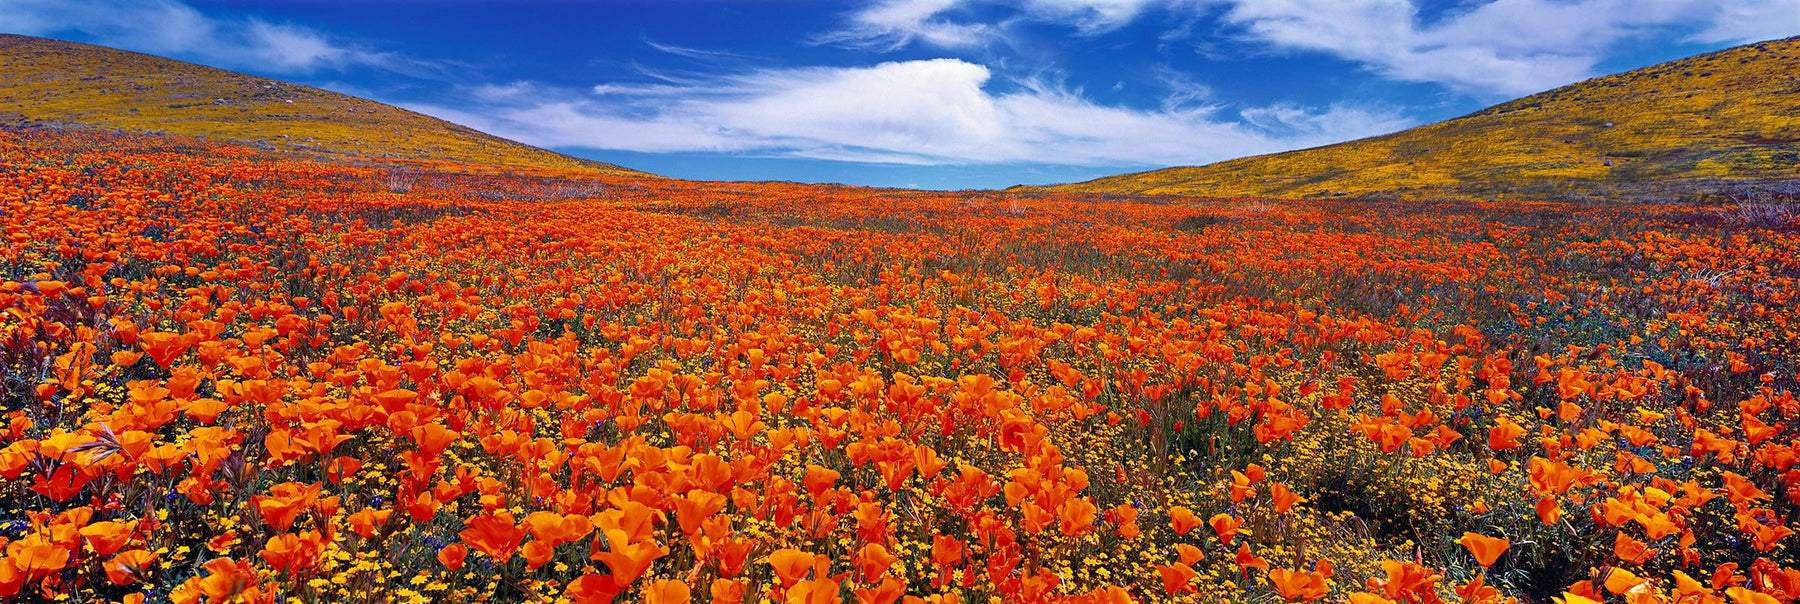 Rolling orange and yellow poppy fields of Antelope Valley Poppy State Reserve California